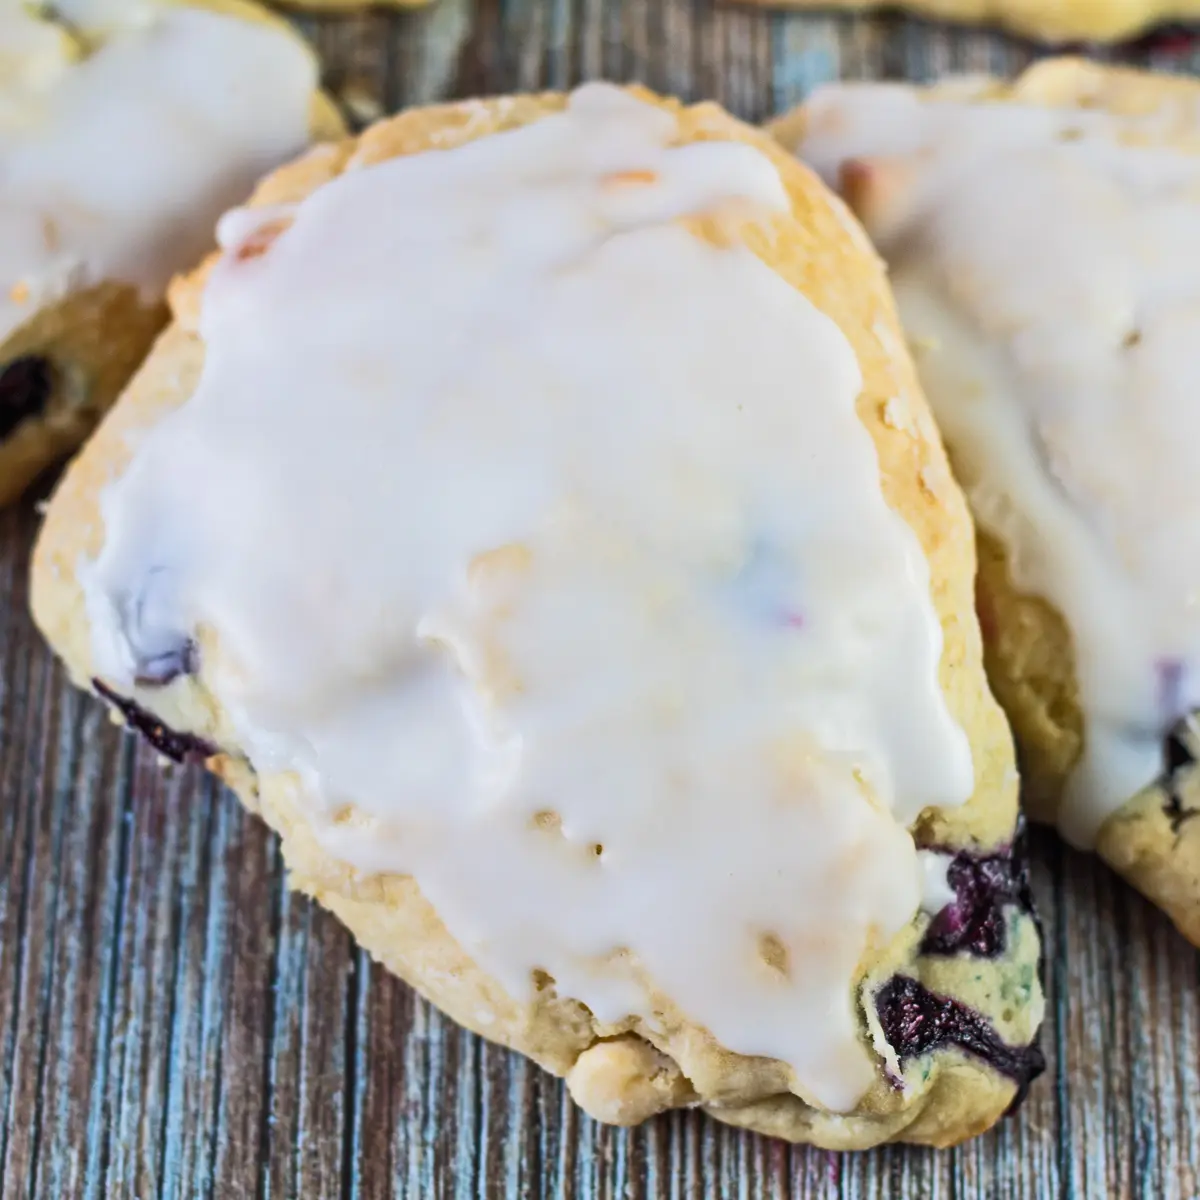 Blueberry white chocolate scone on a wooden background.